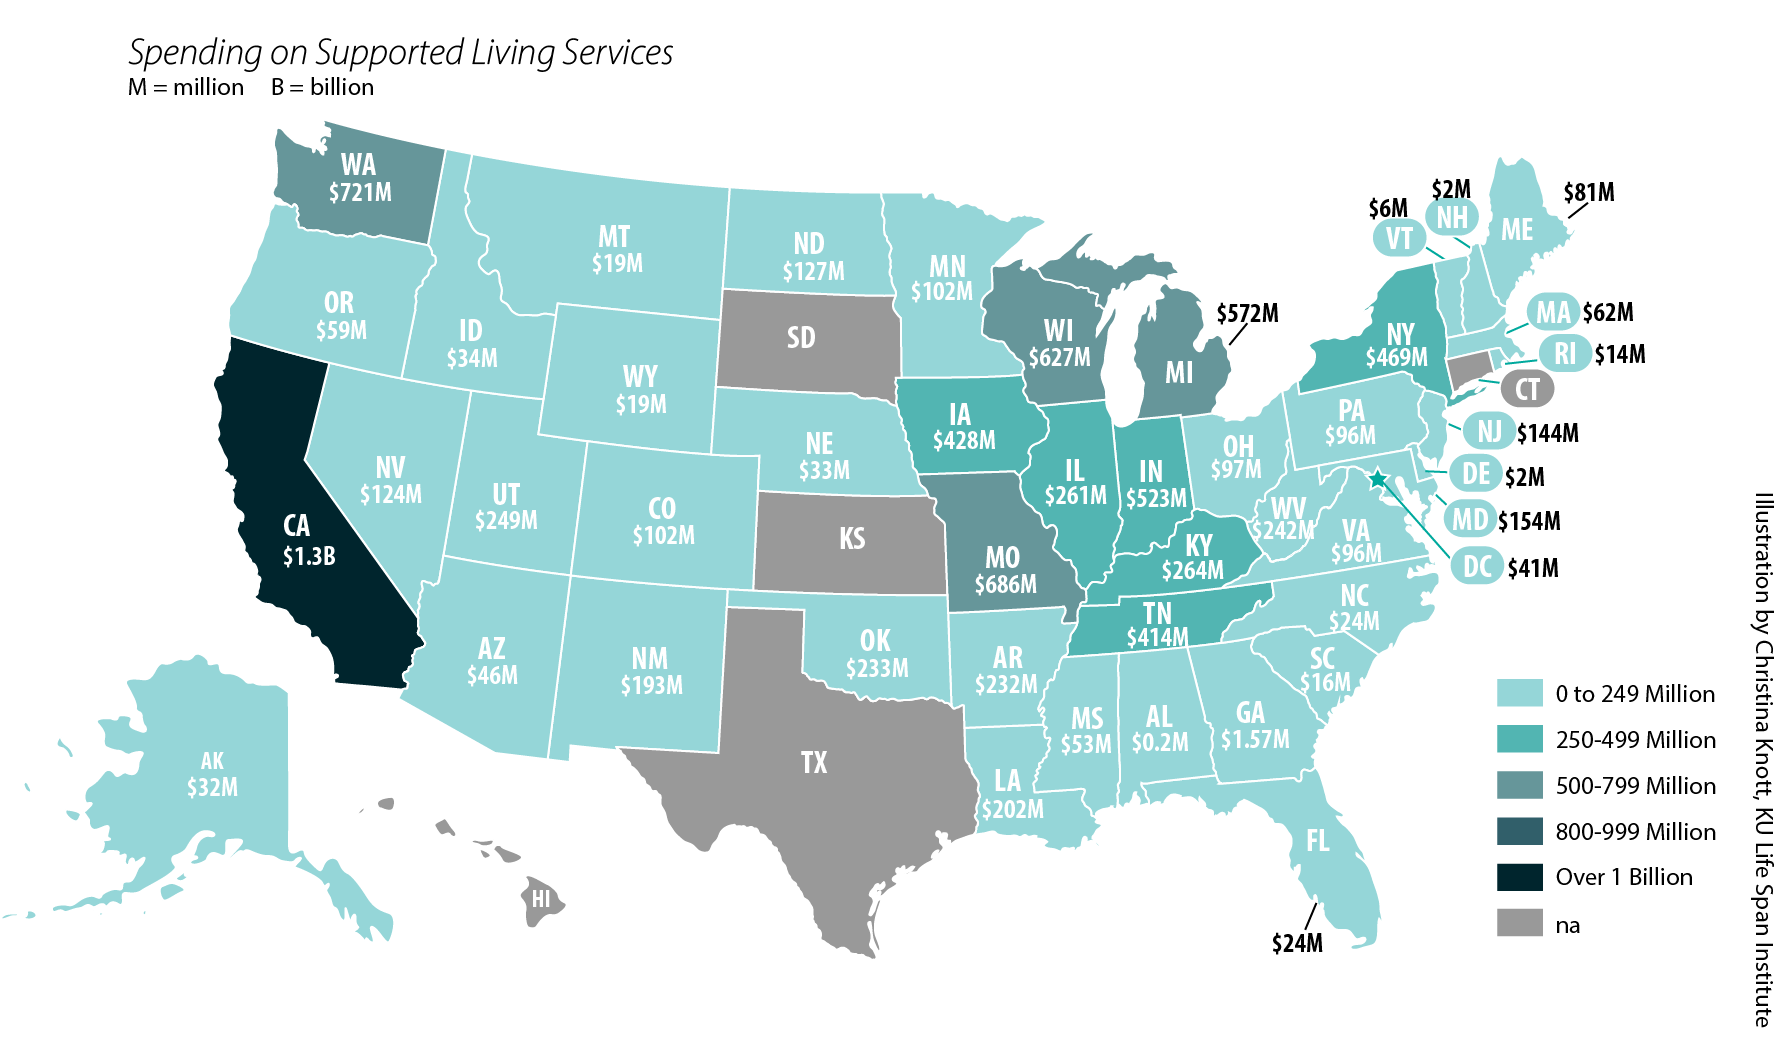 U.S. map showing spending on supported living services